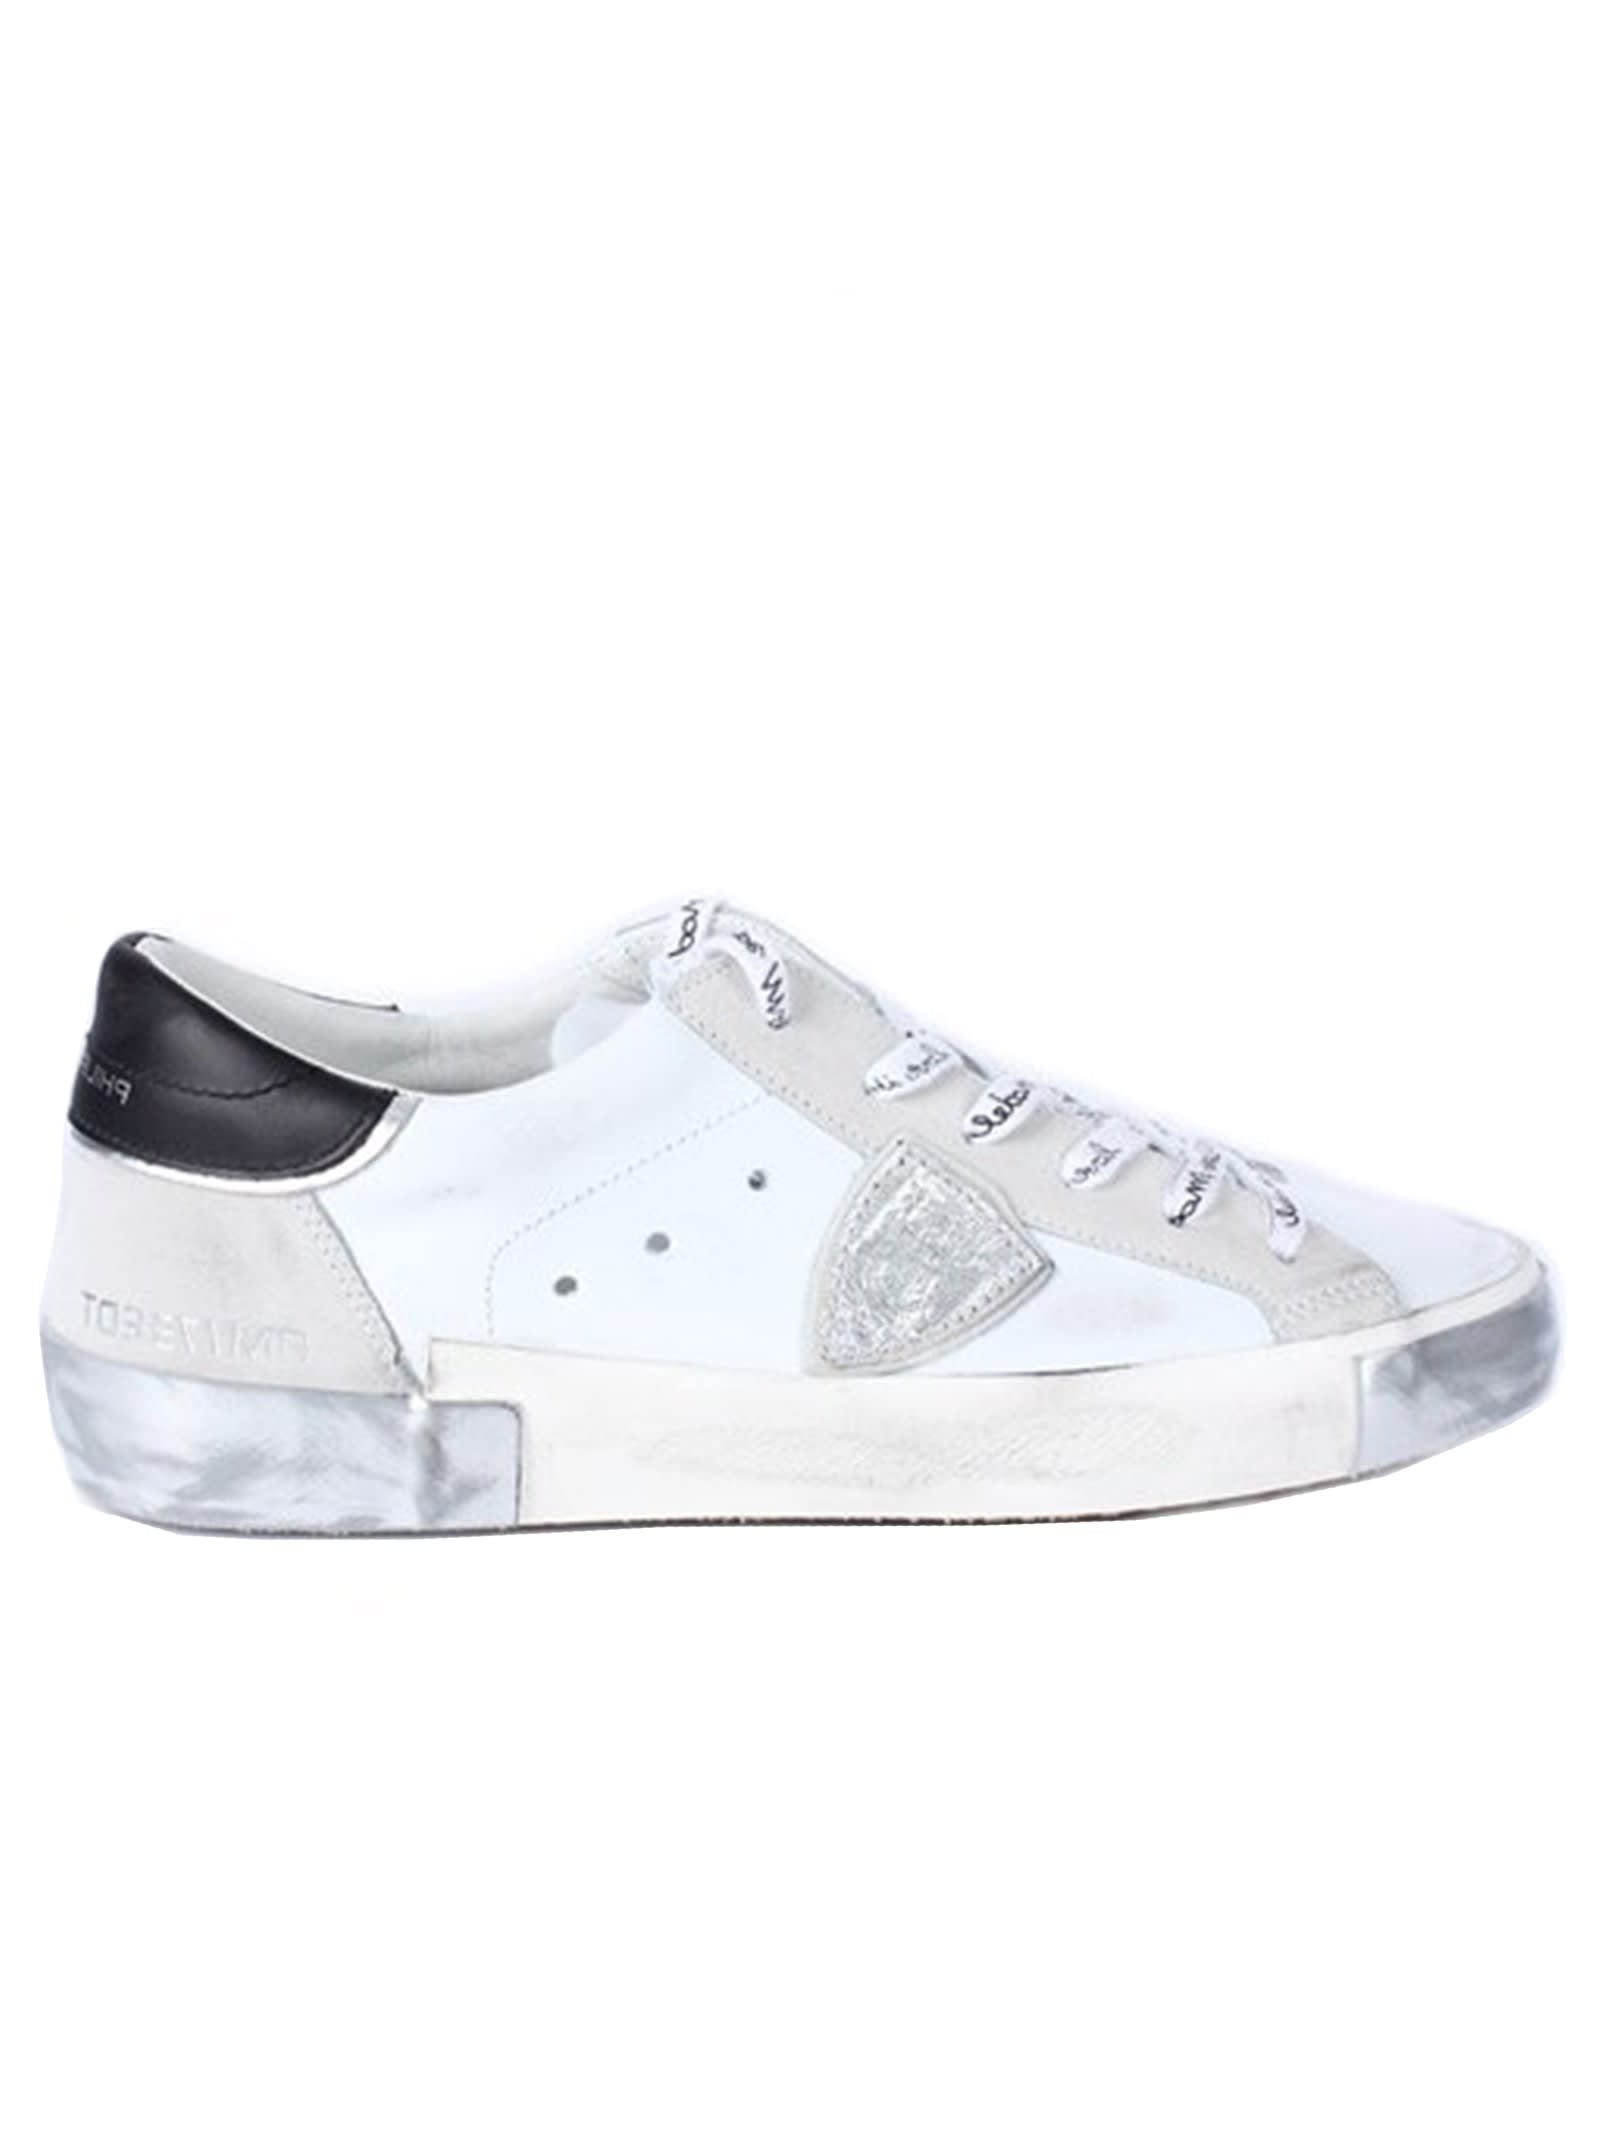 Philippe Modelwhite/black Leather Sneakers